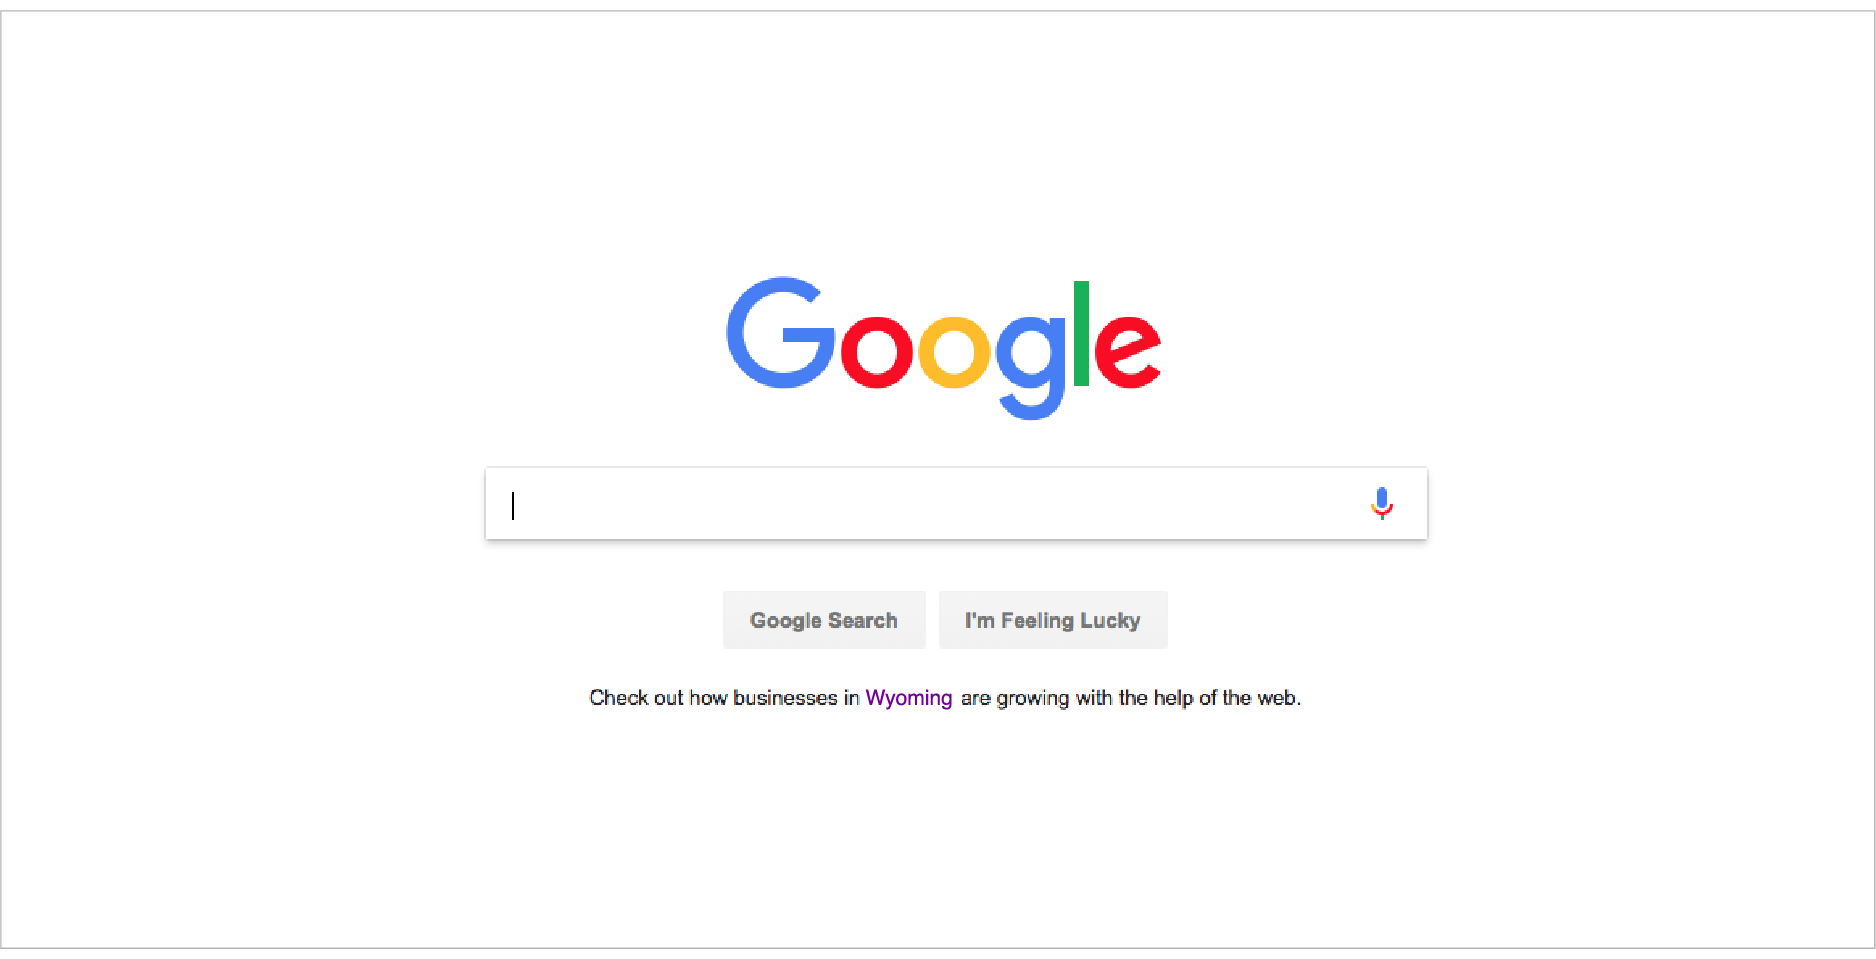 Project featured on Google search home page